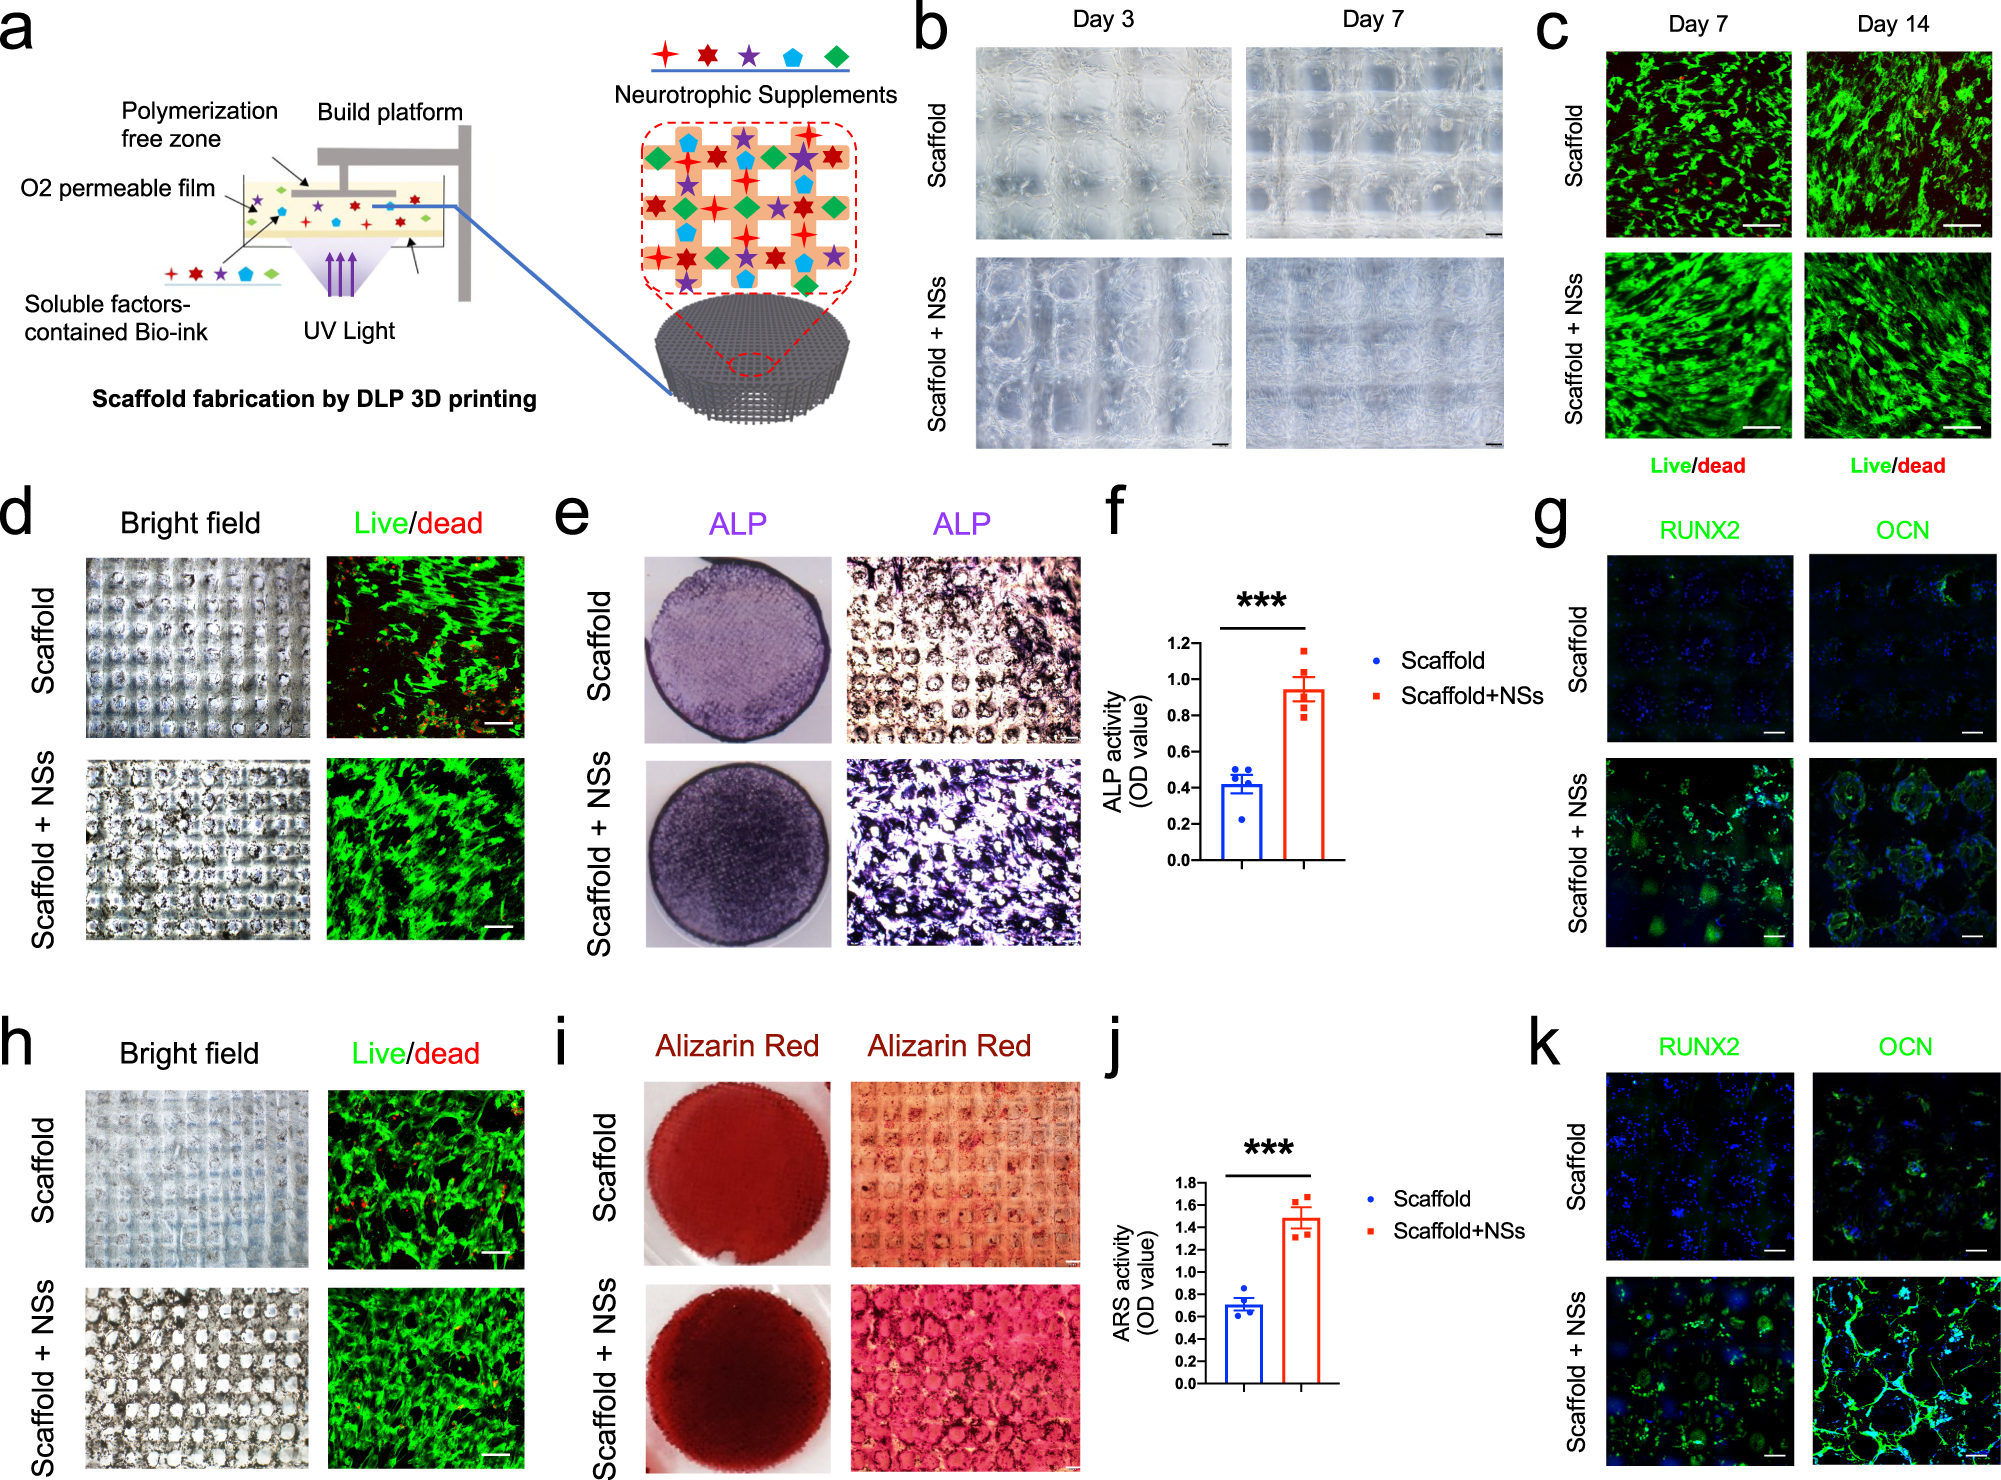 Msx1+ stem cells recruited by bioactive tissue engineering graft for bone regeneration Nature Communications